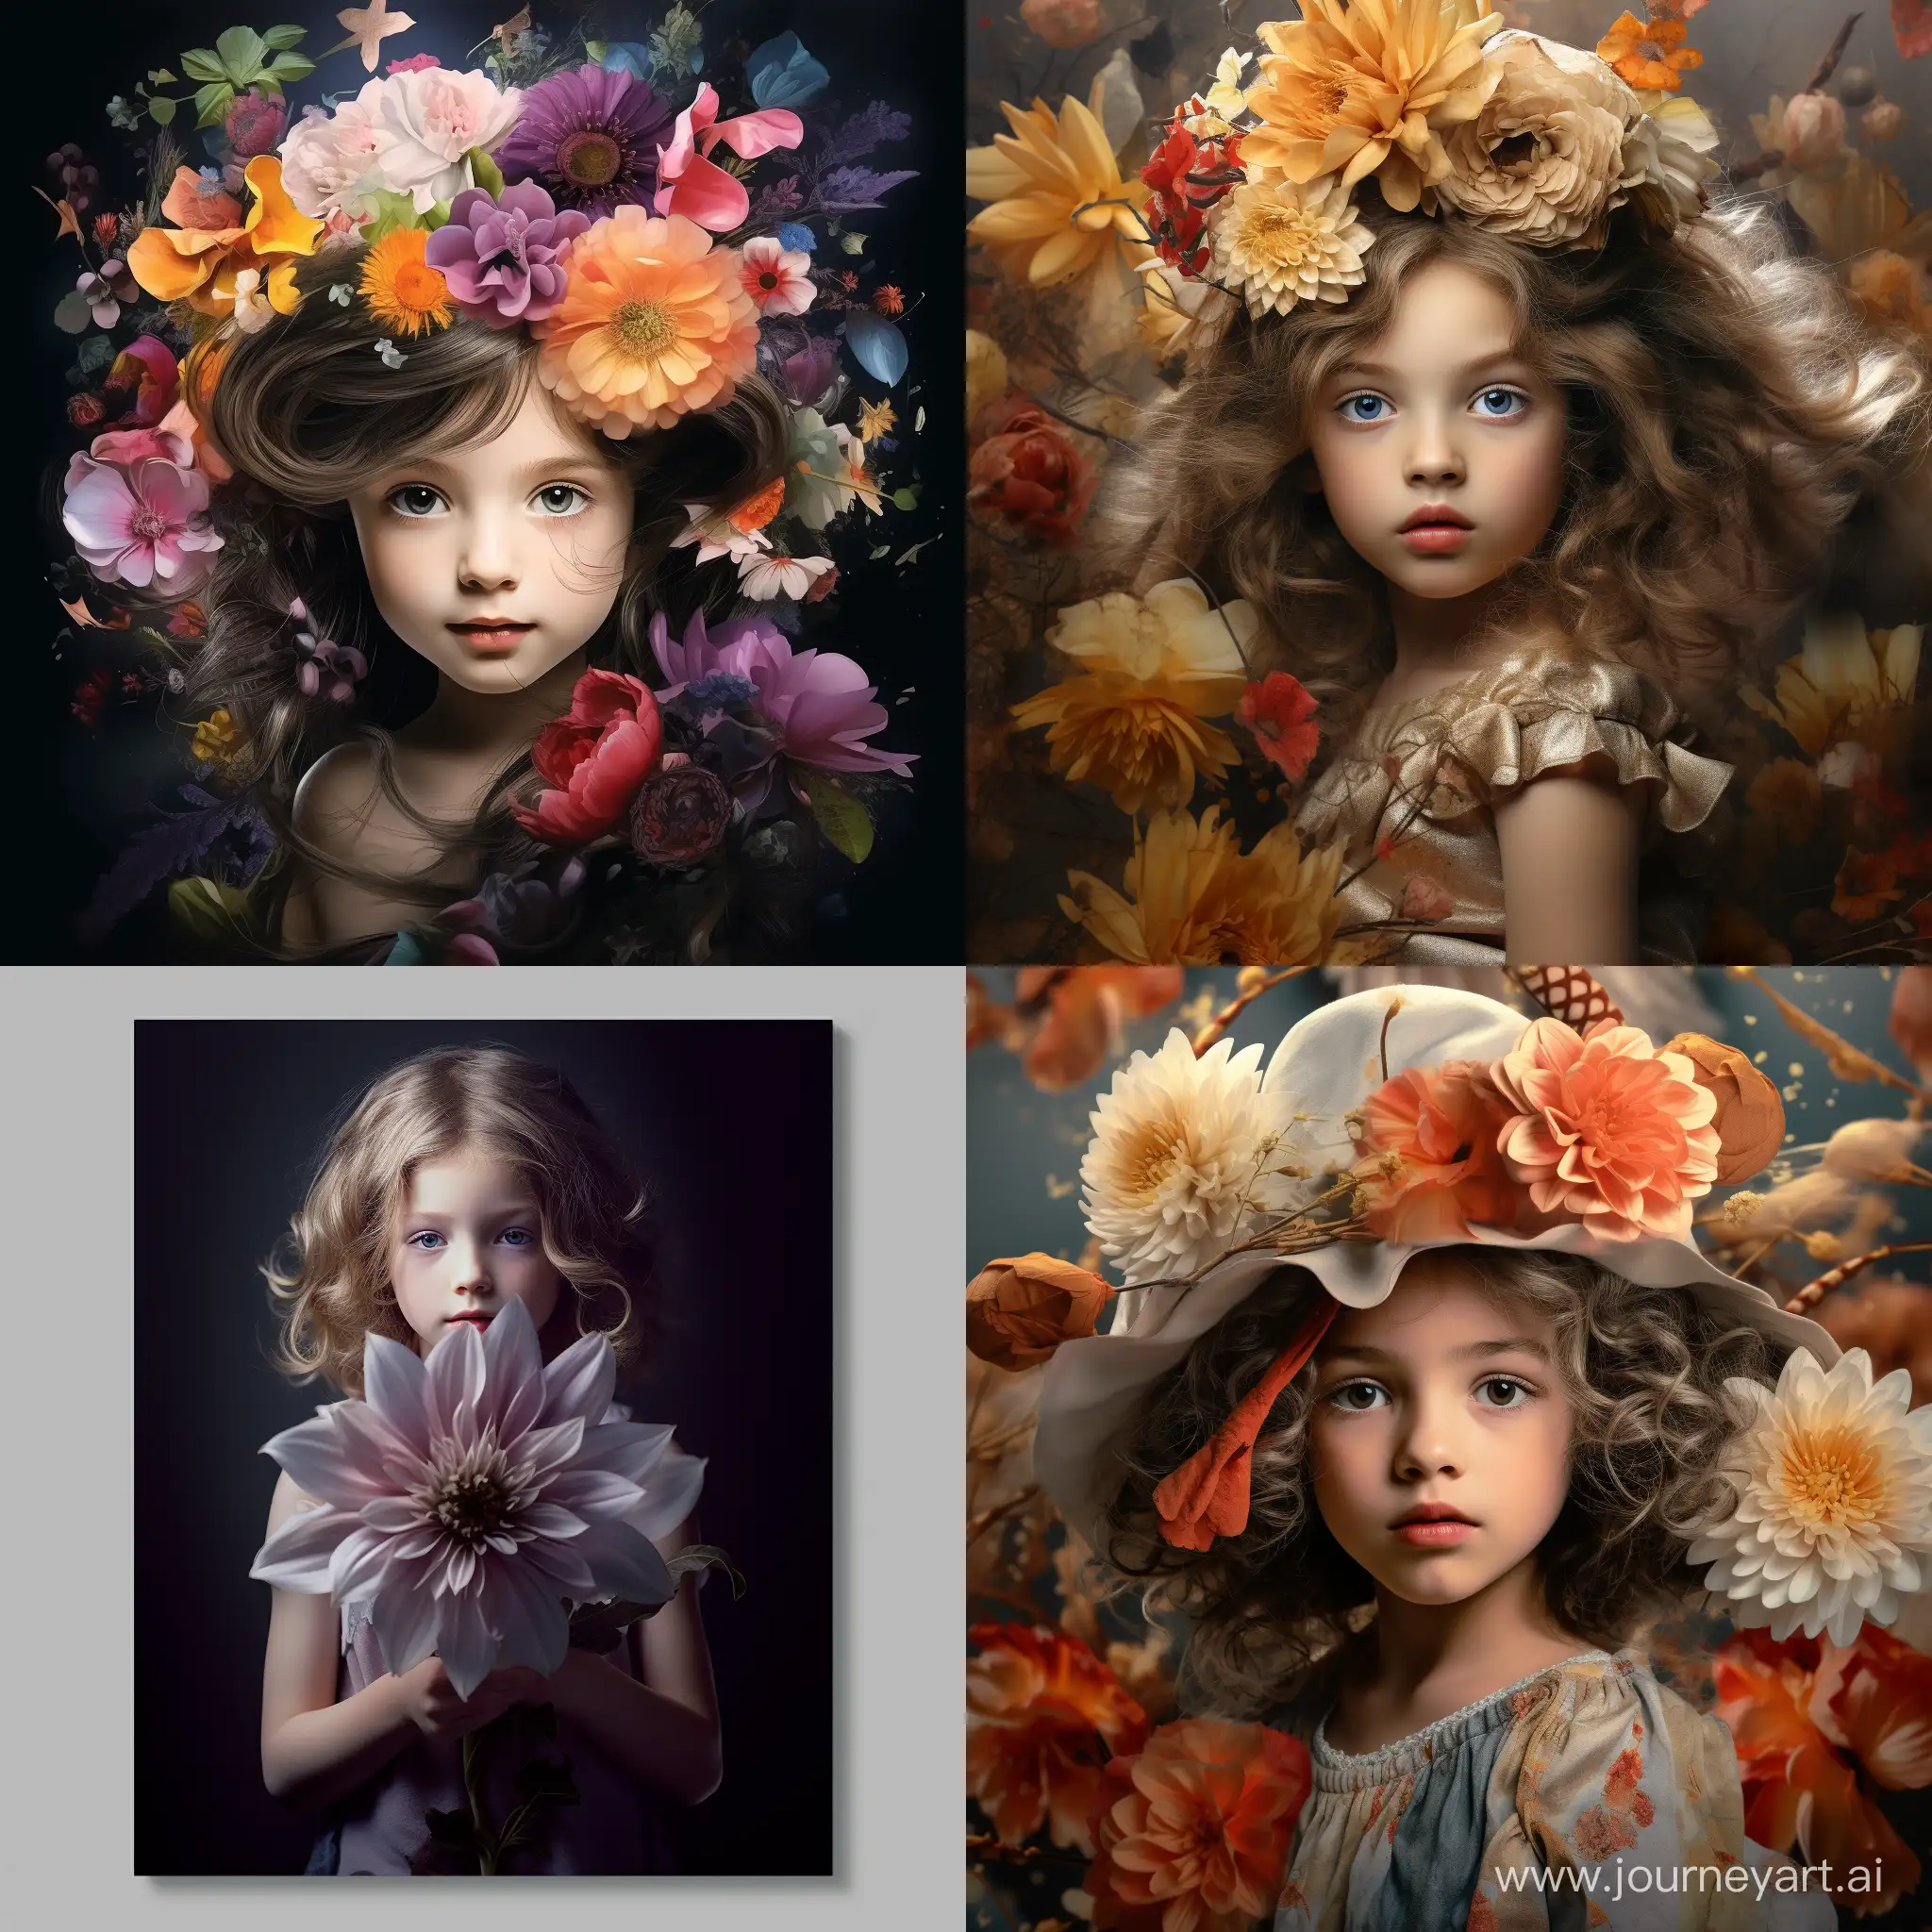 Charming-Little-Girl-with-Vibrant-Flowers-Beautiful-11-Artwork-2159